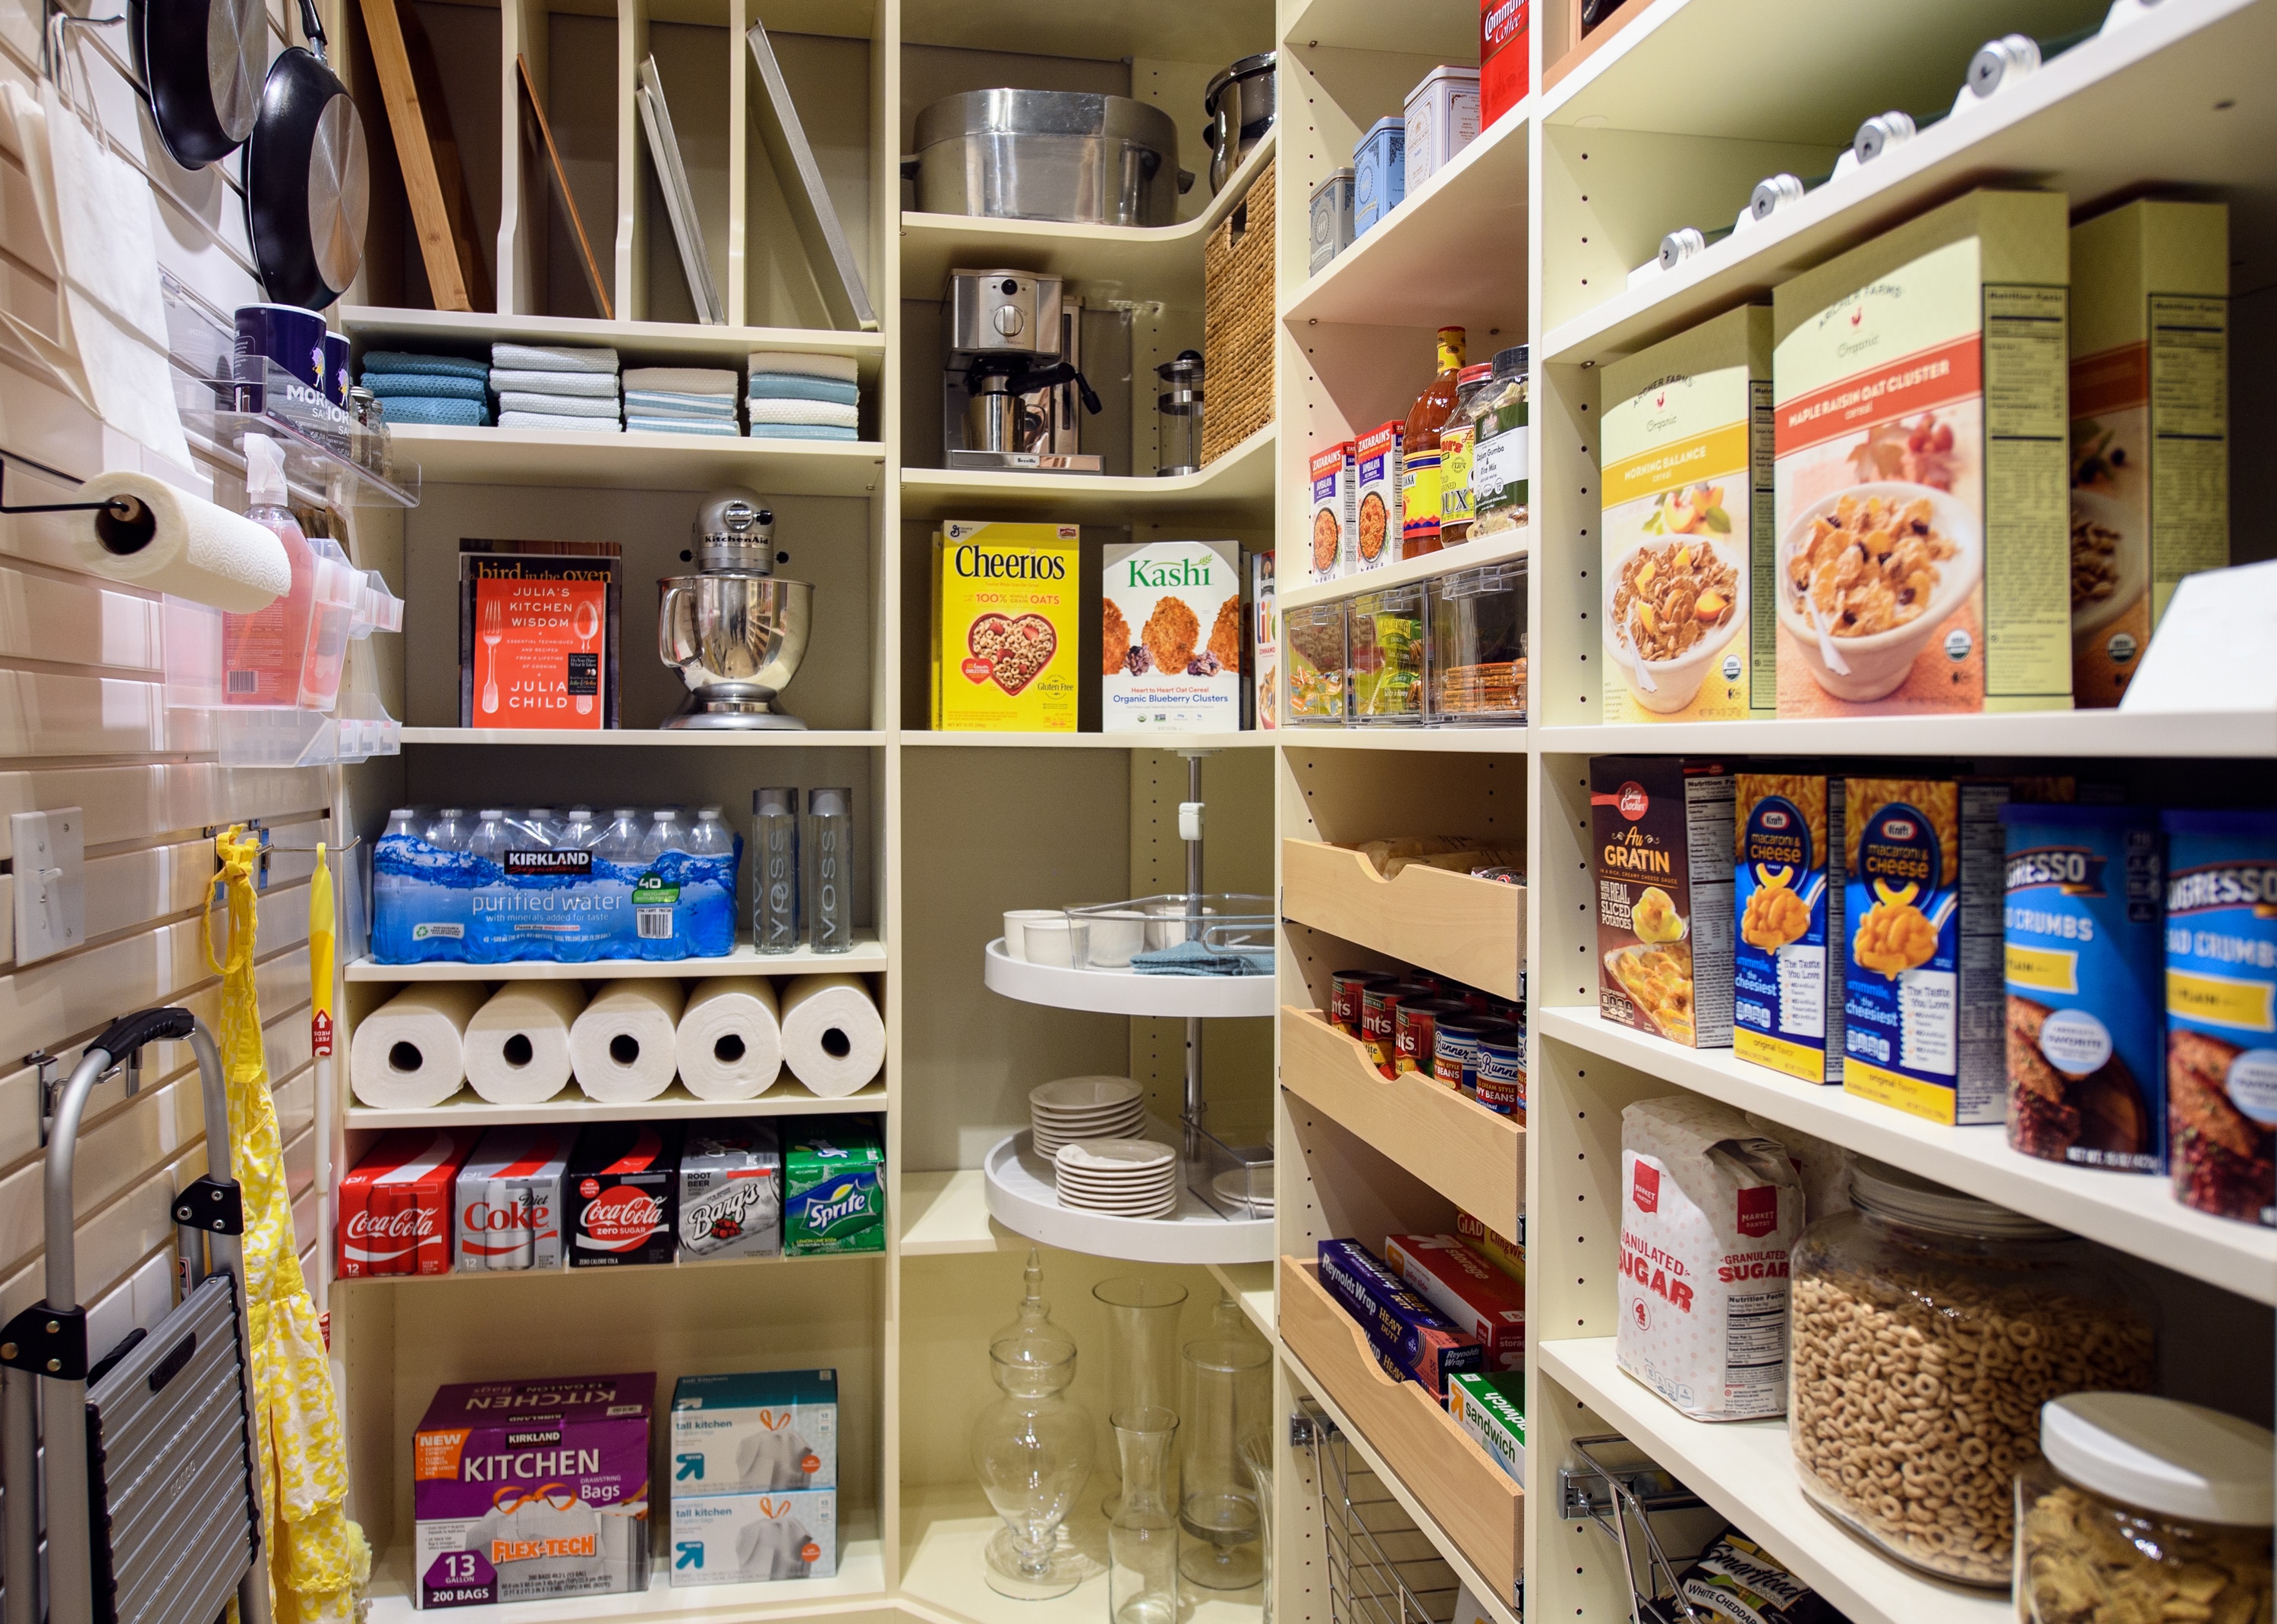 Pantry with items hung on wall and food on shelves